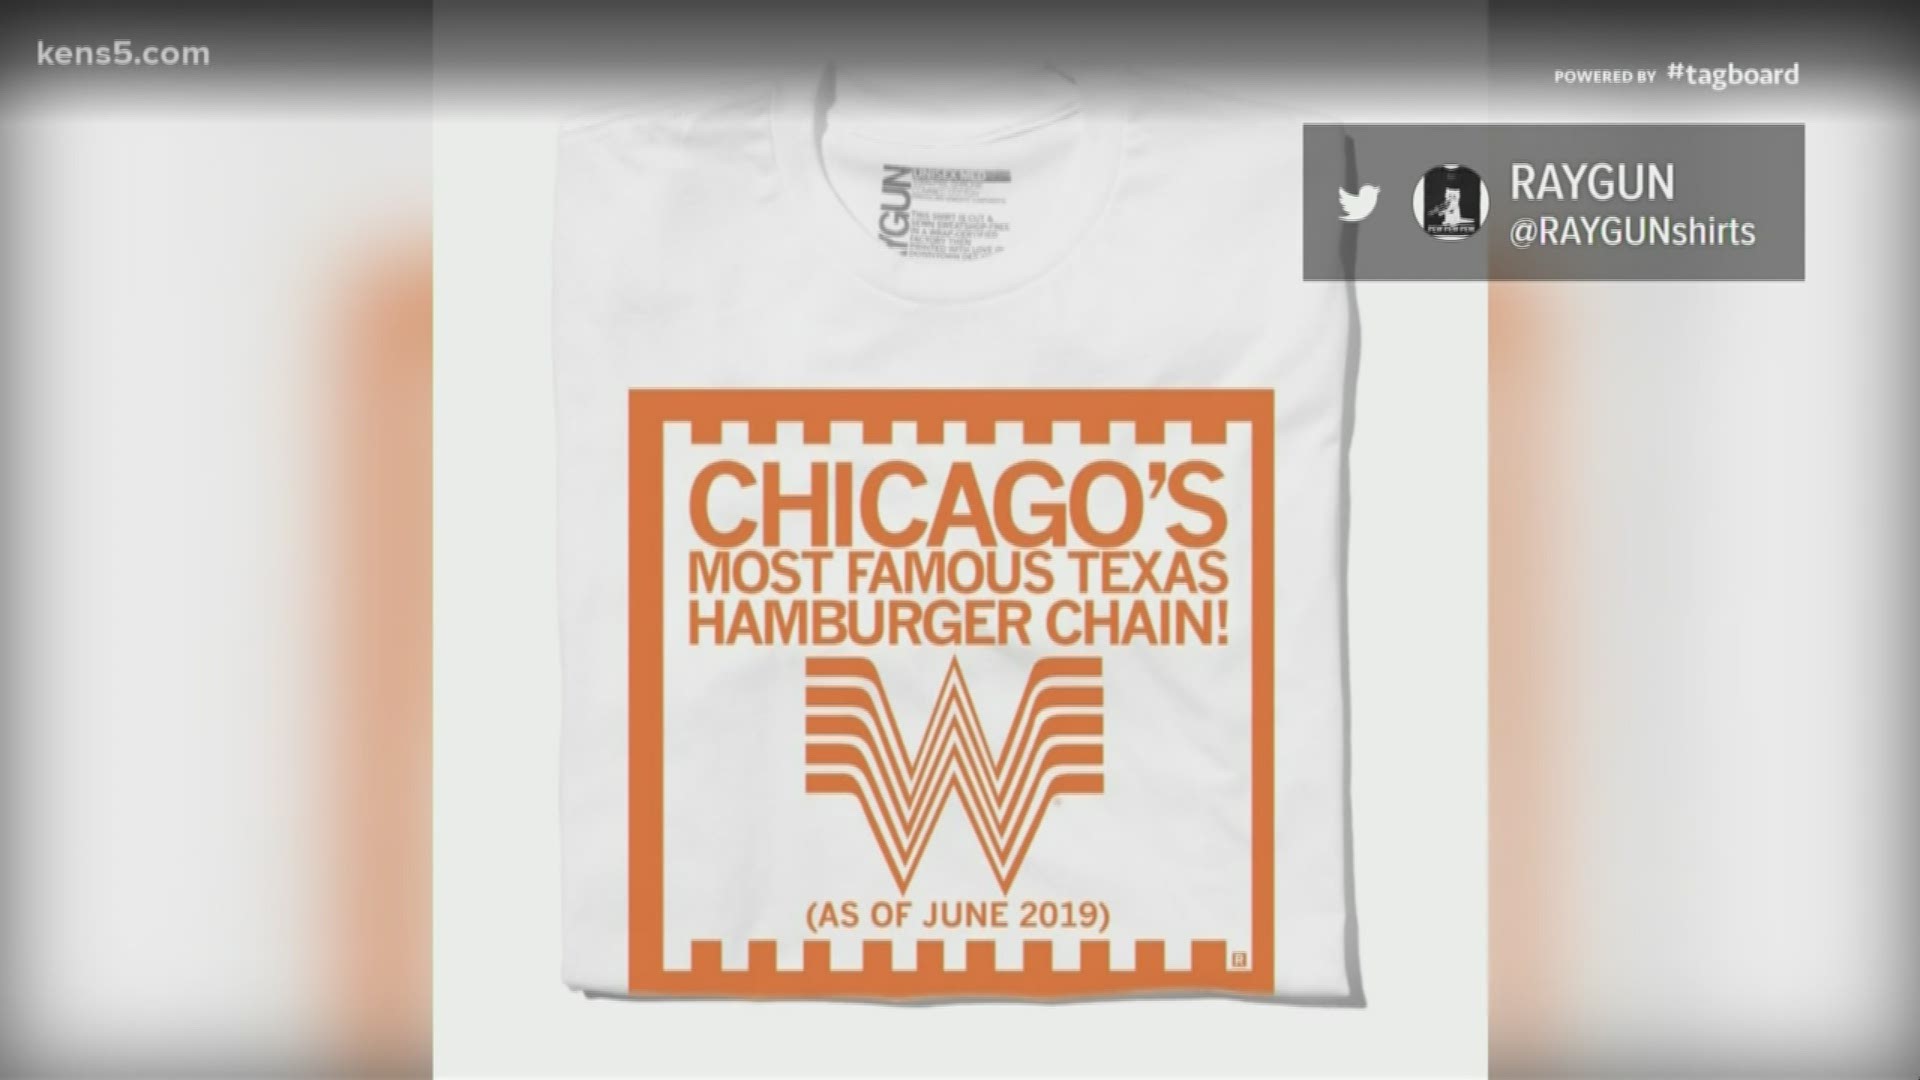 Raygun, a t-shirt company based in Des Moines, Iowa, is now selling a Whataburger t-shirt. It reads: “Chicago’s most famous Texas hamburger chain (as of June 2019)” and features a Whataburger logo.